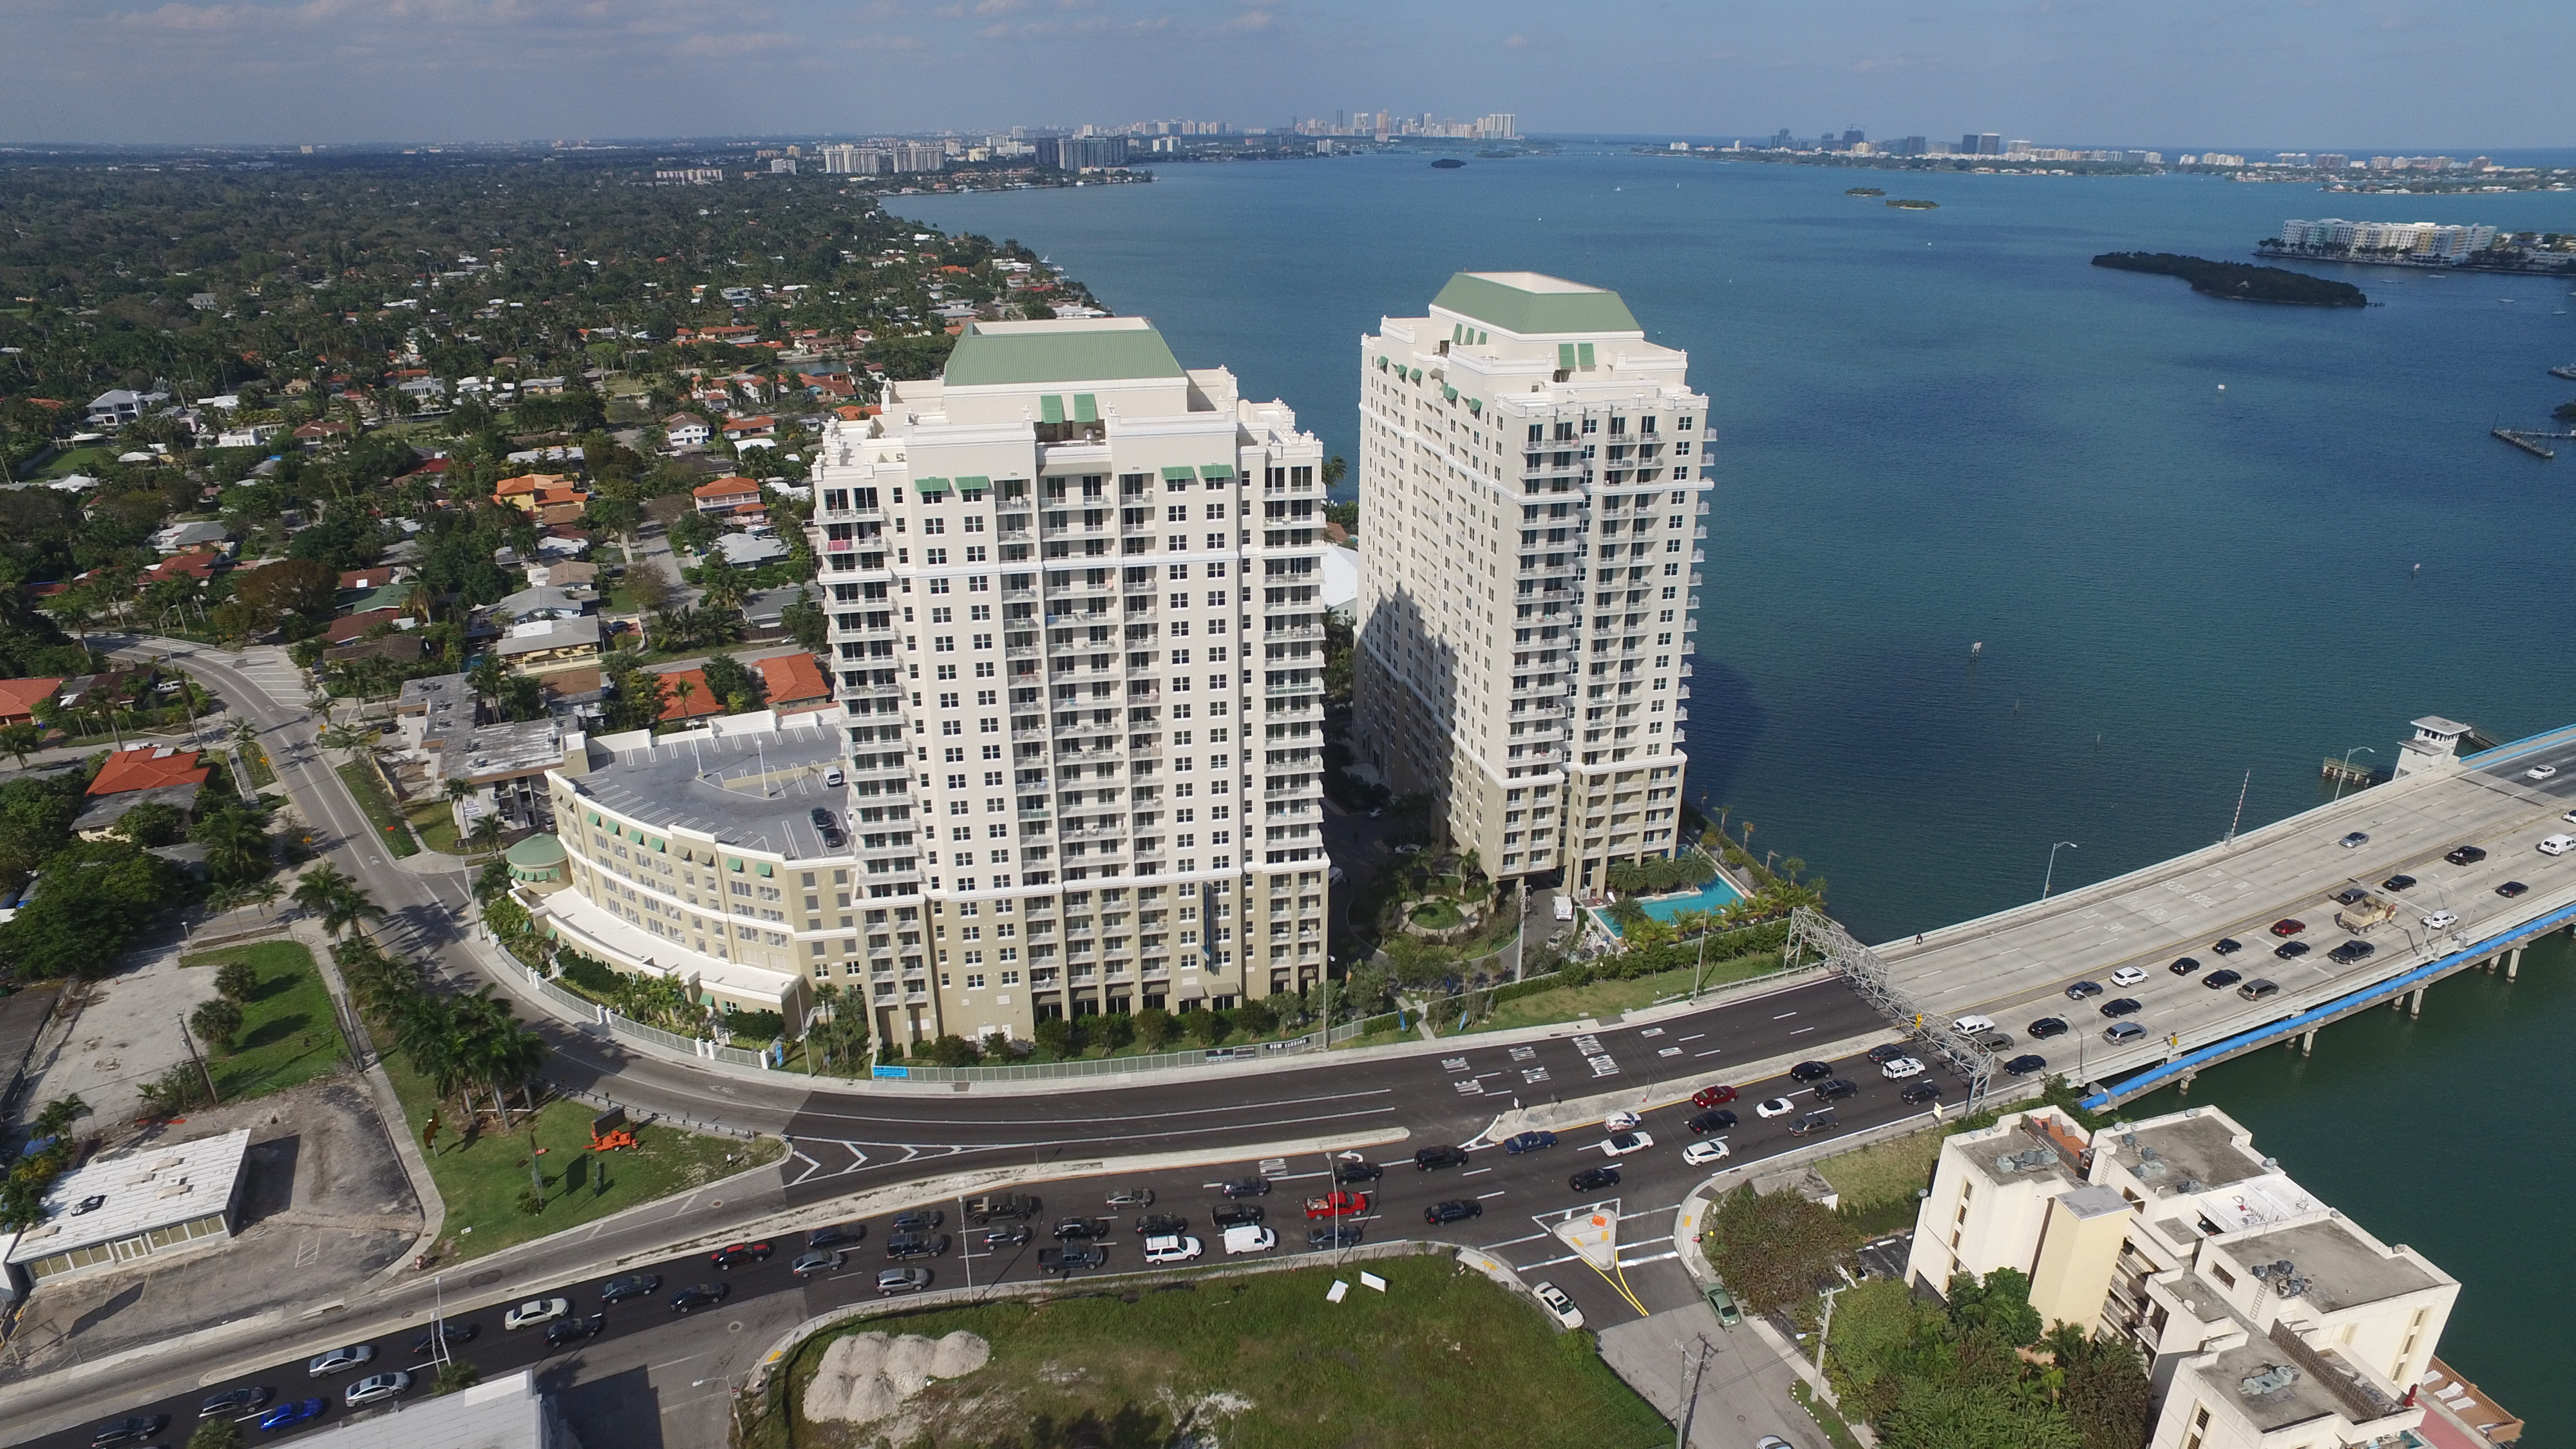 Aerial view of two waterfront high rise apartment buildings and causeway.